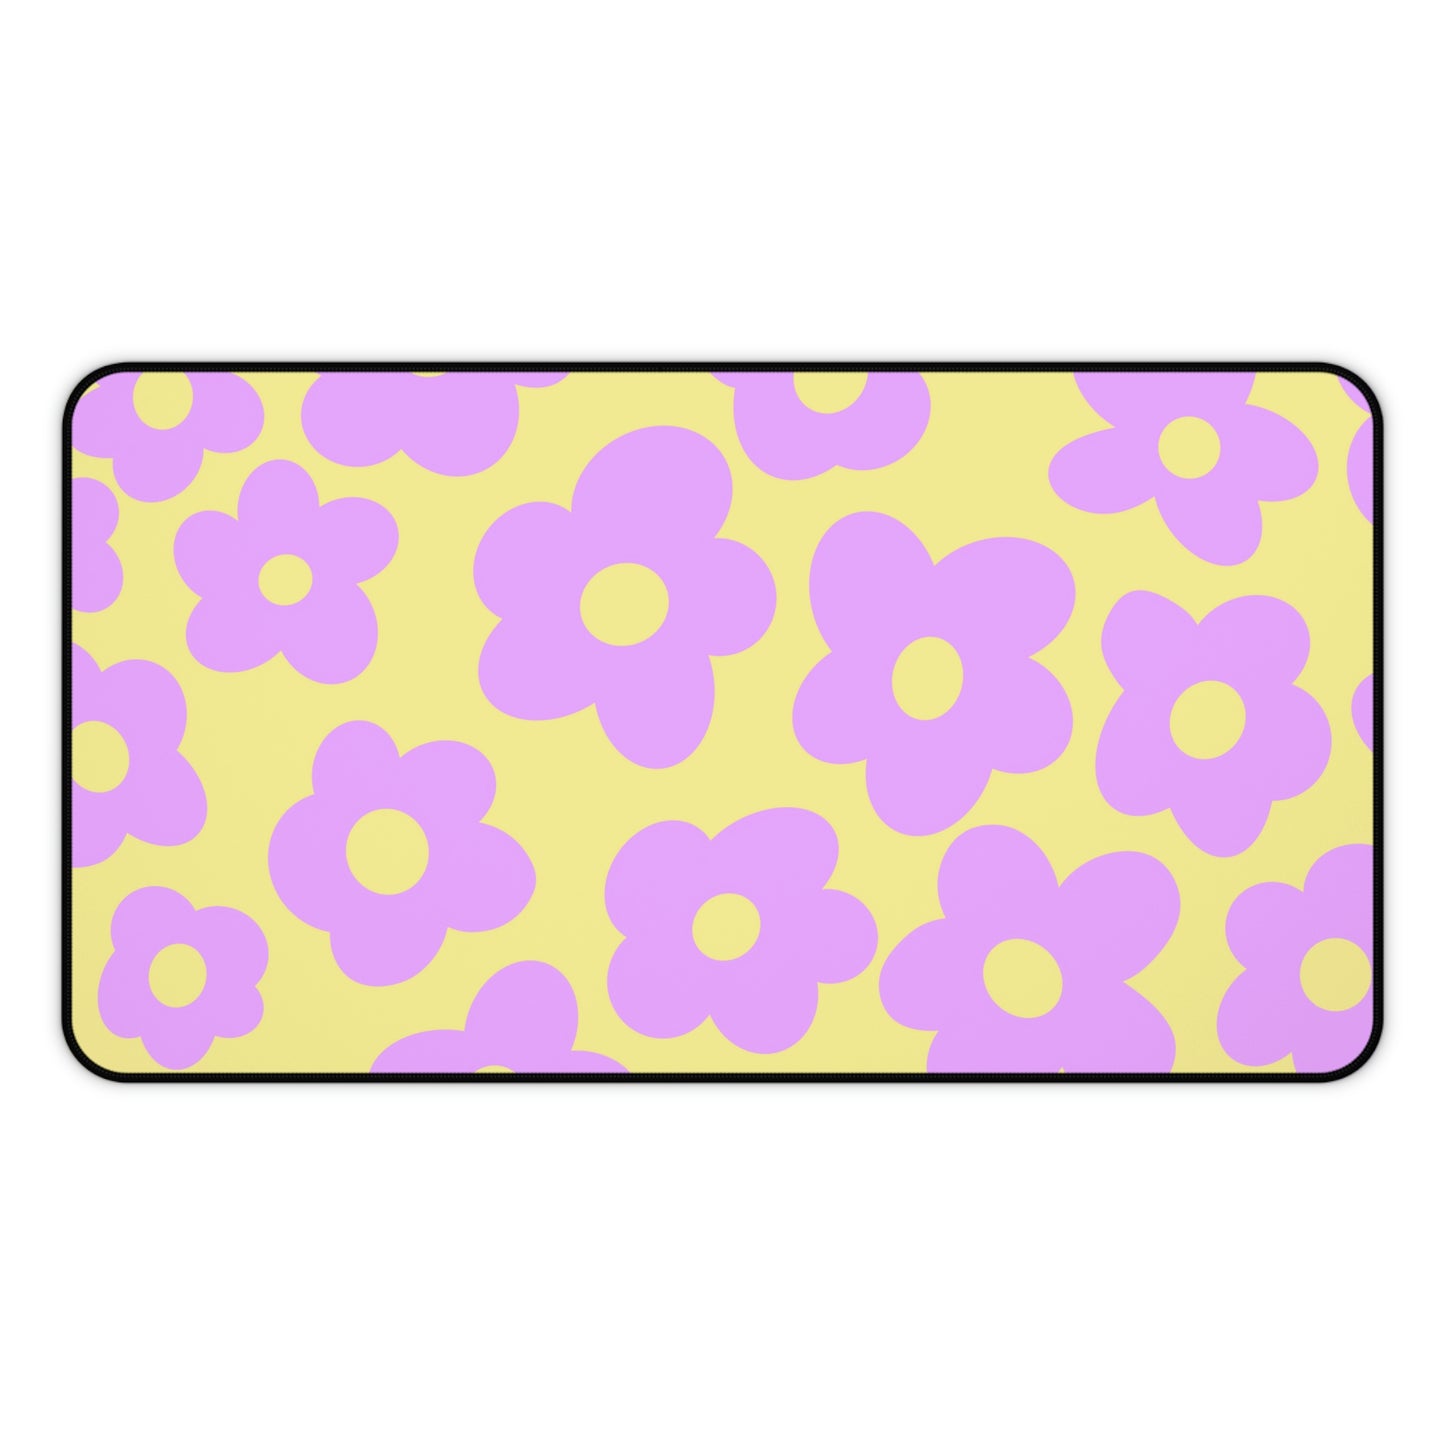 A 12" x 22" desk mat with purple flowers on a yellow background.